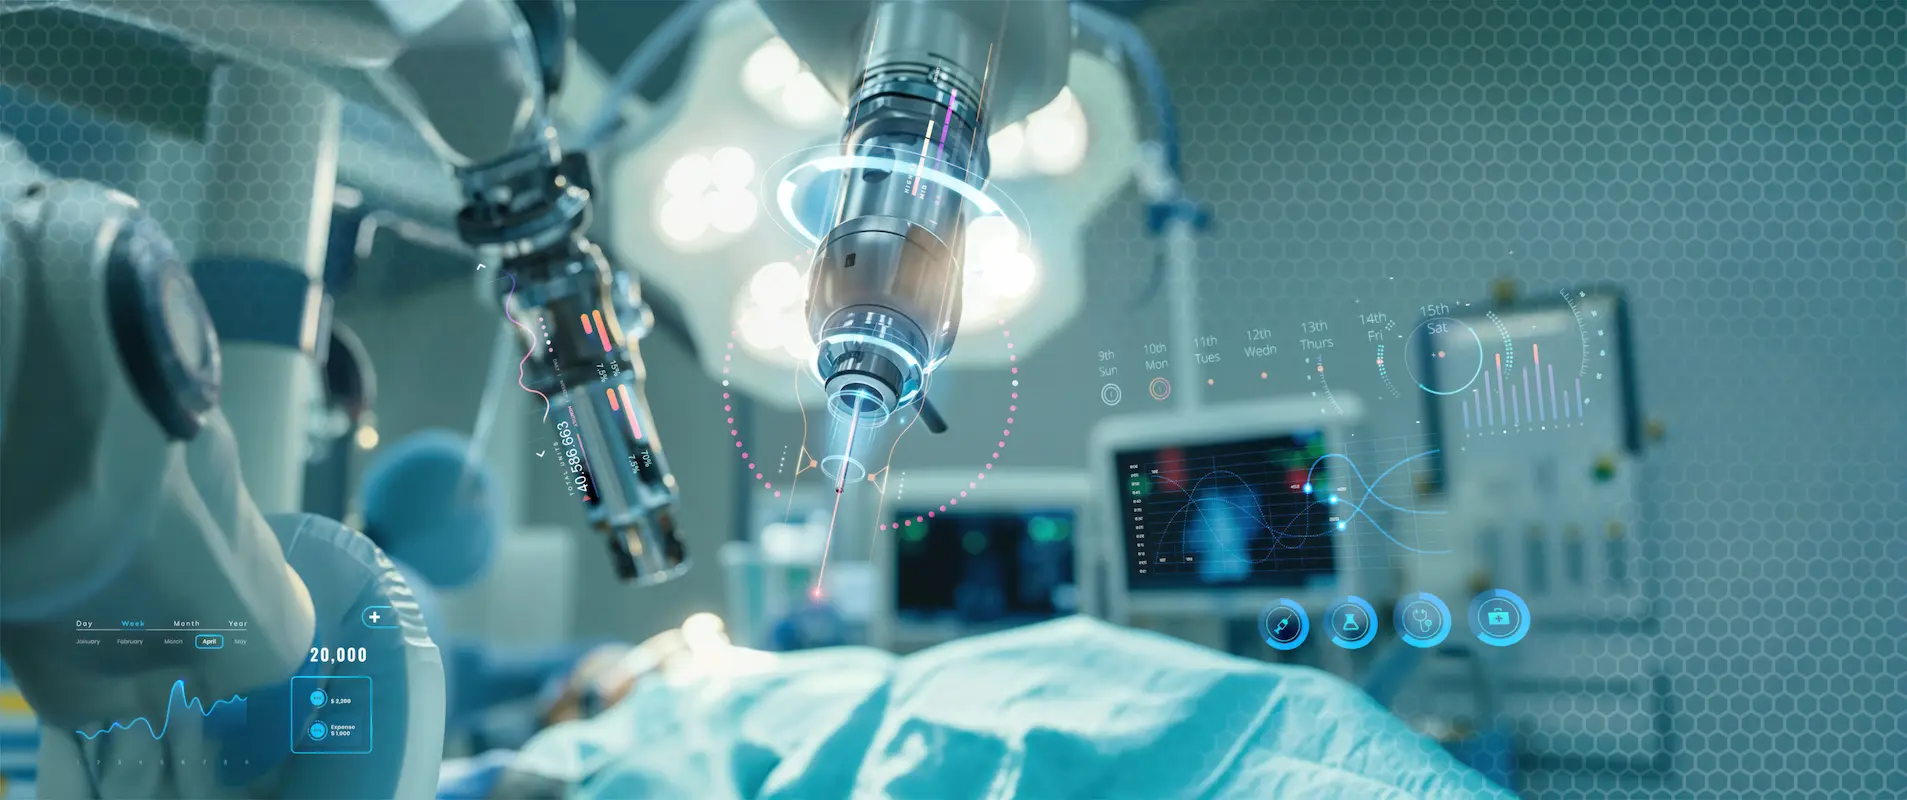 Q&A: Surgical Robotics Innovation, R&D, and Commercialization